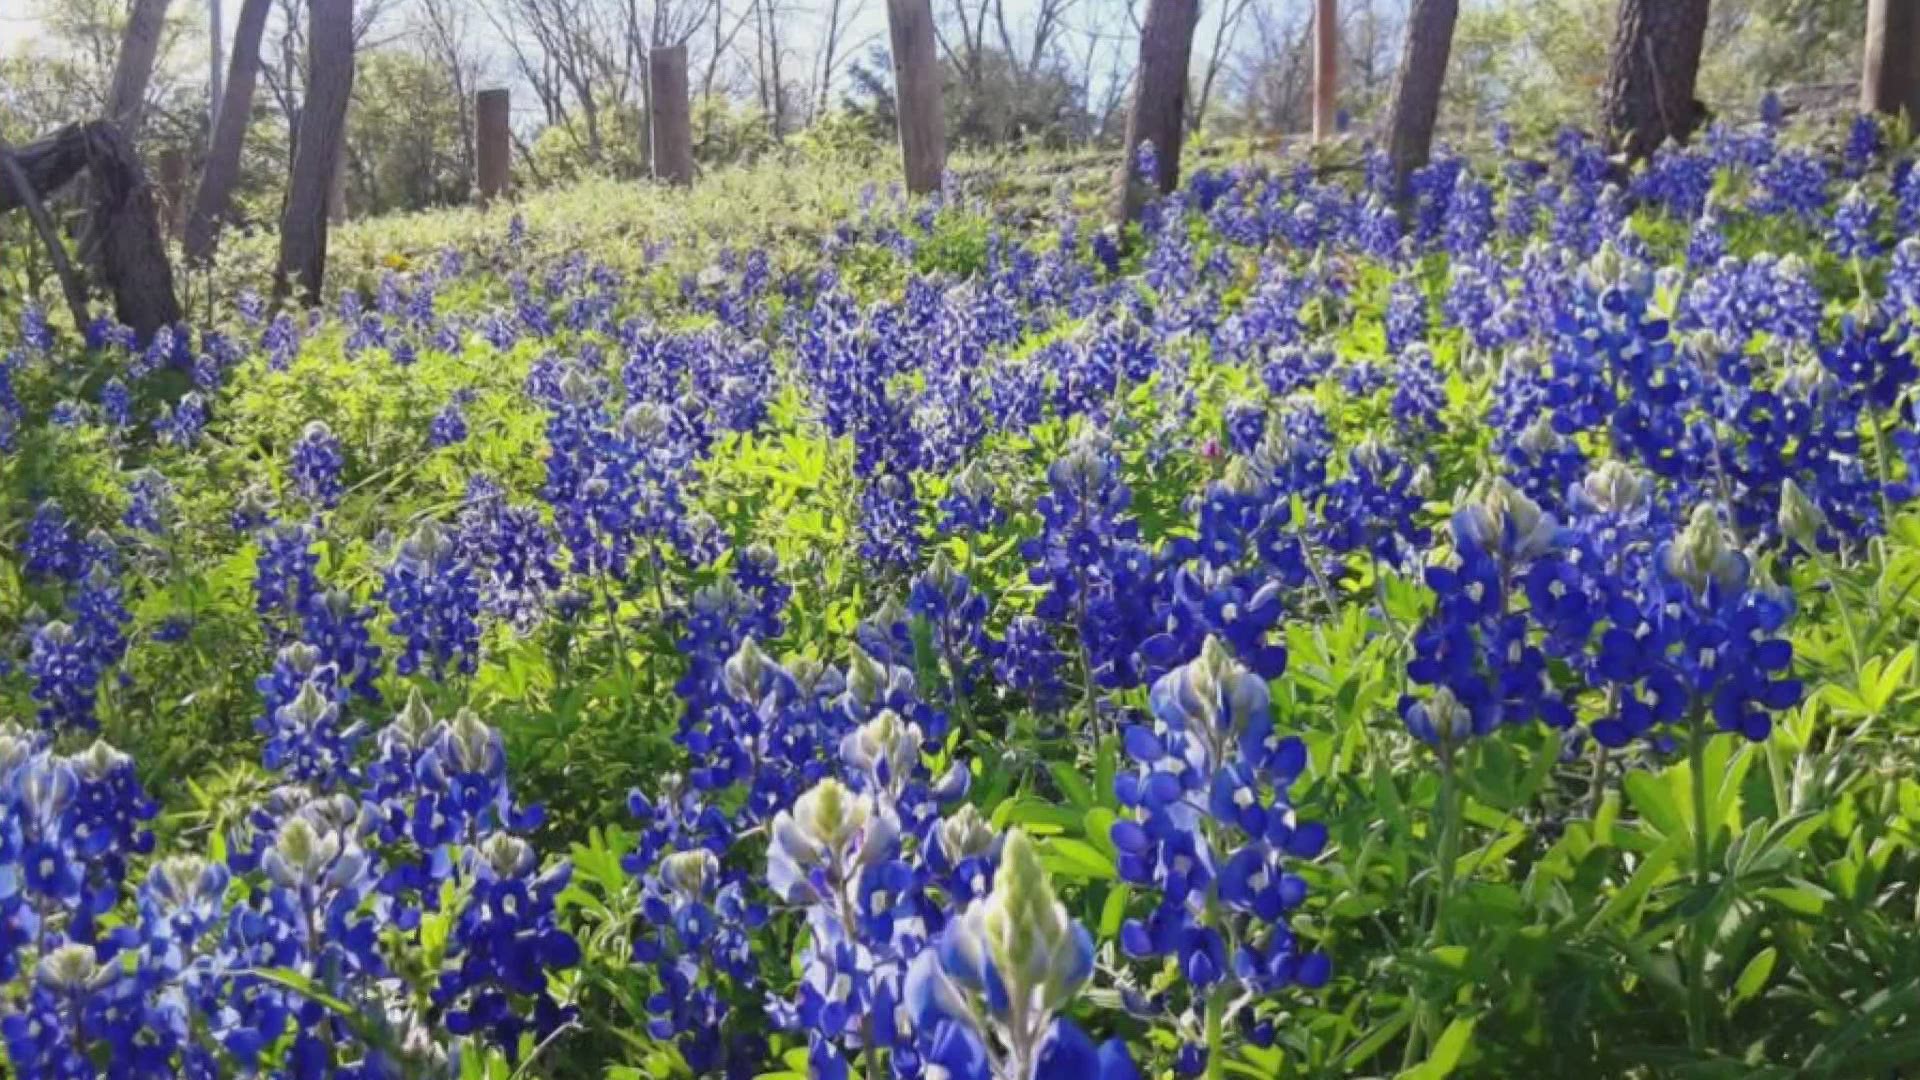 Despite that monster winter storm, the spring wildflowers in Texas are expected to be beautiful!